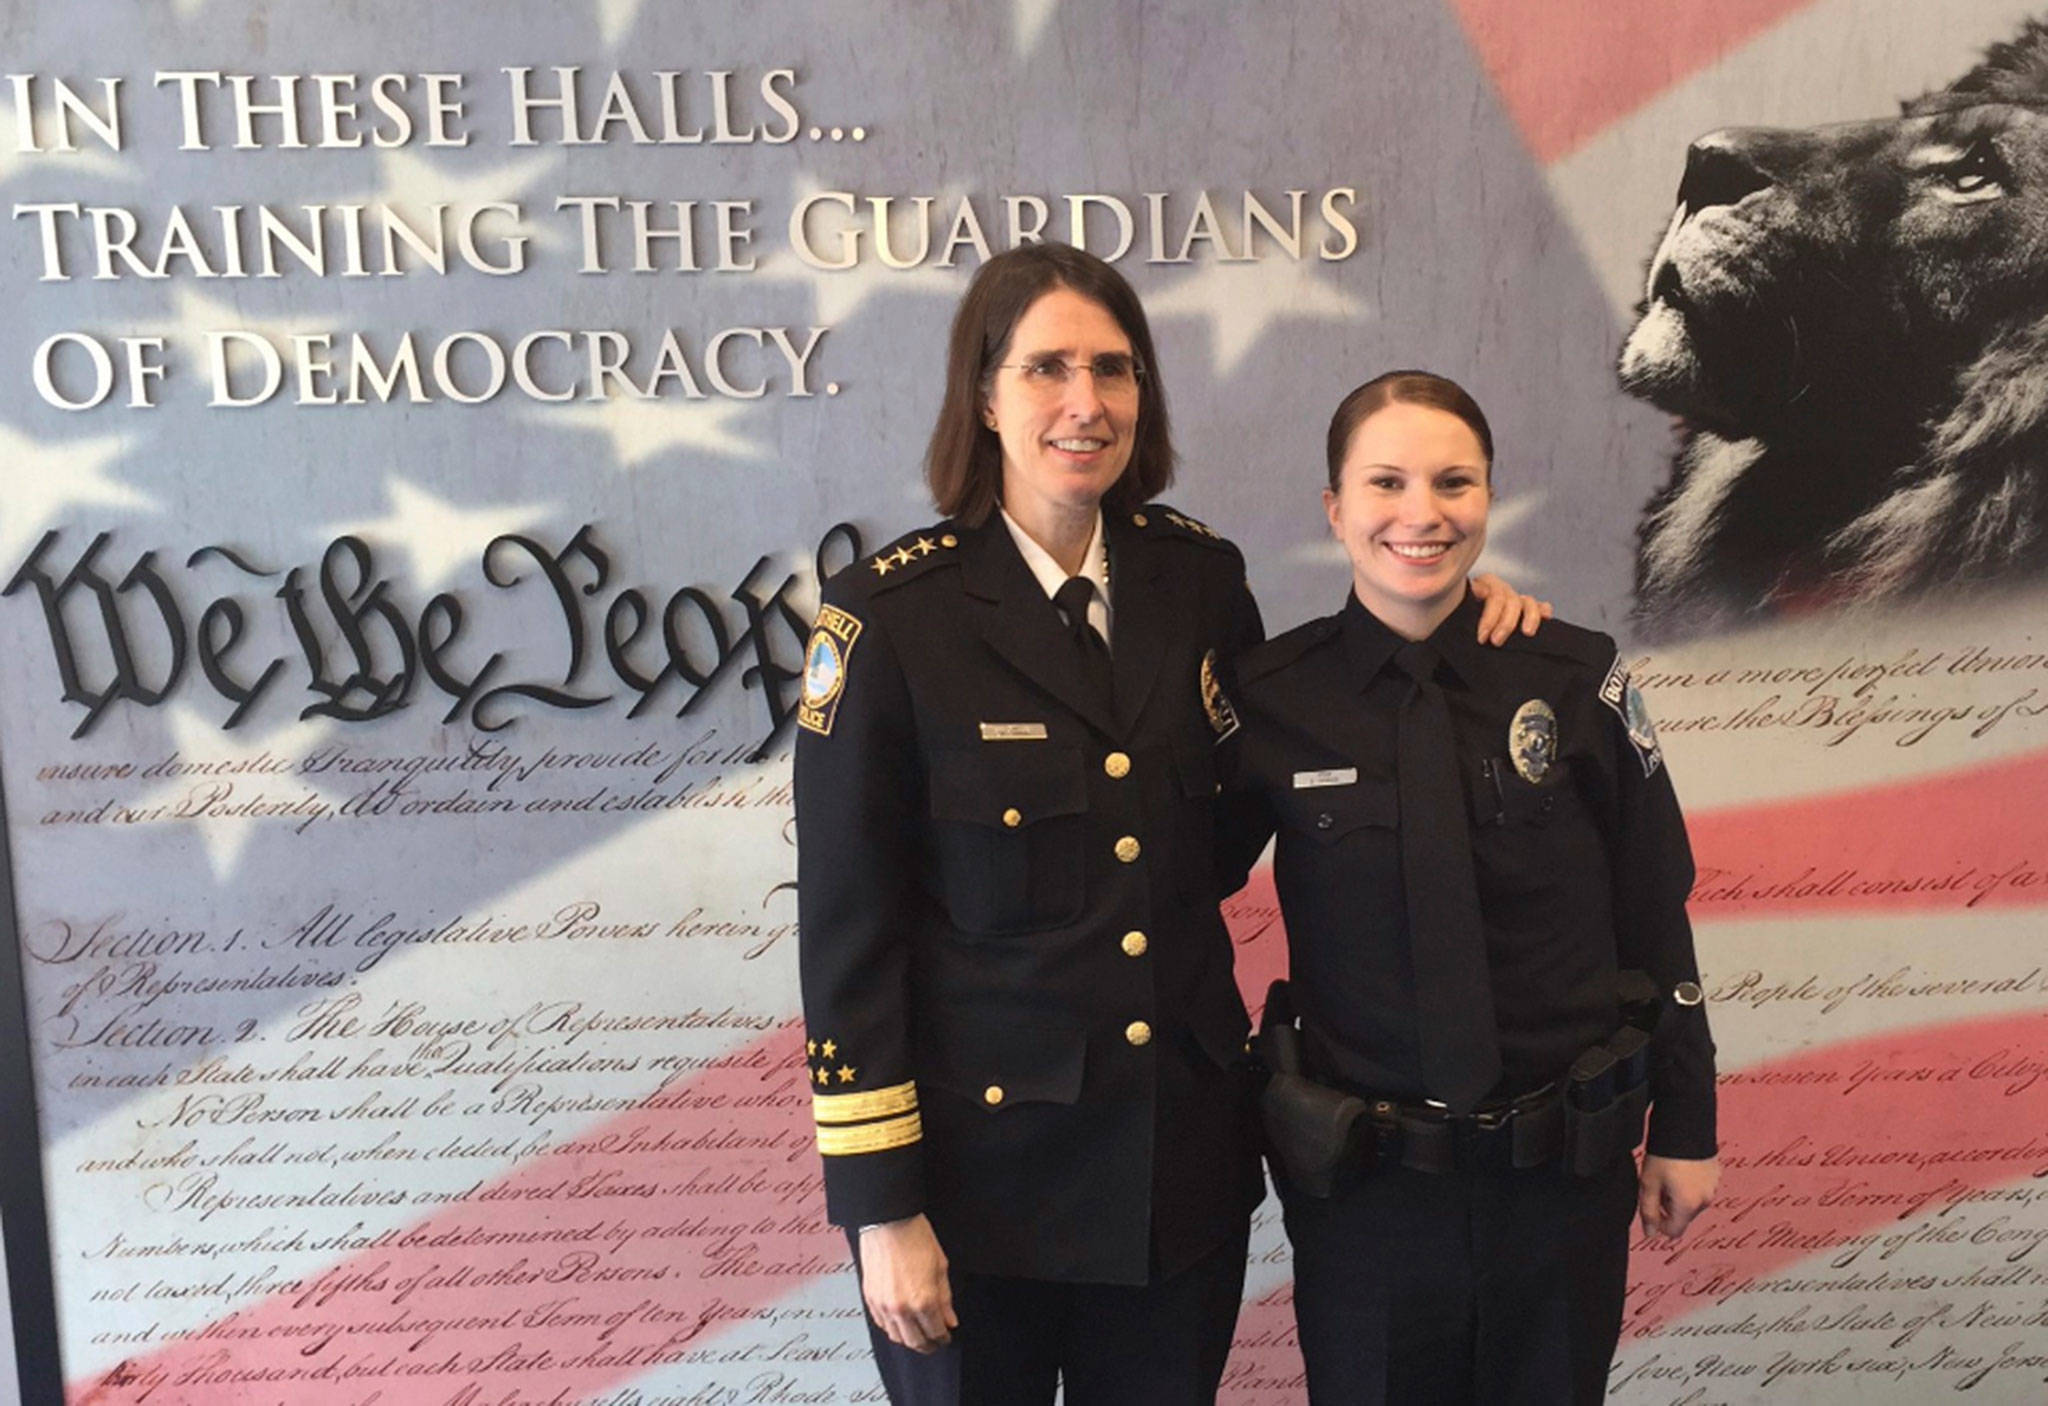 Bothell Police Chief Carol Cummings swears in new officer Brittany Johnsen in April 2015. Photo via Twitter